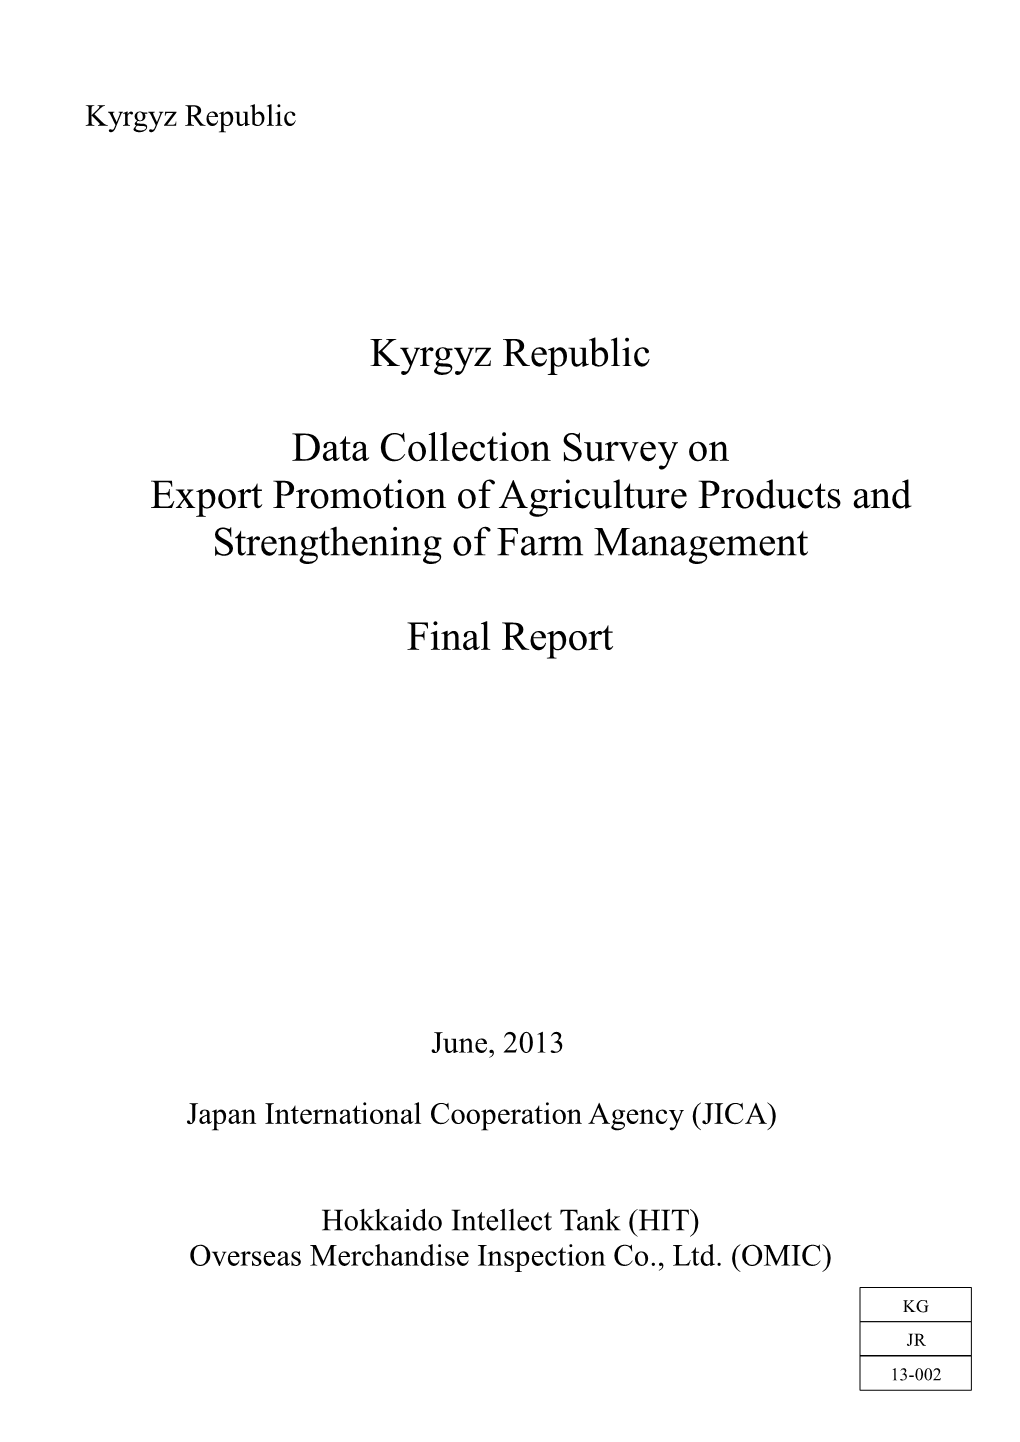 Kyrgyz Republic Data Collection Survey on Export Promotion Ofagriculture Products and Strengthening of Farm Management Final